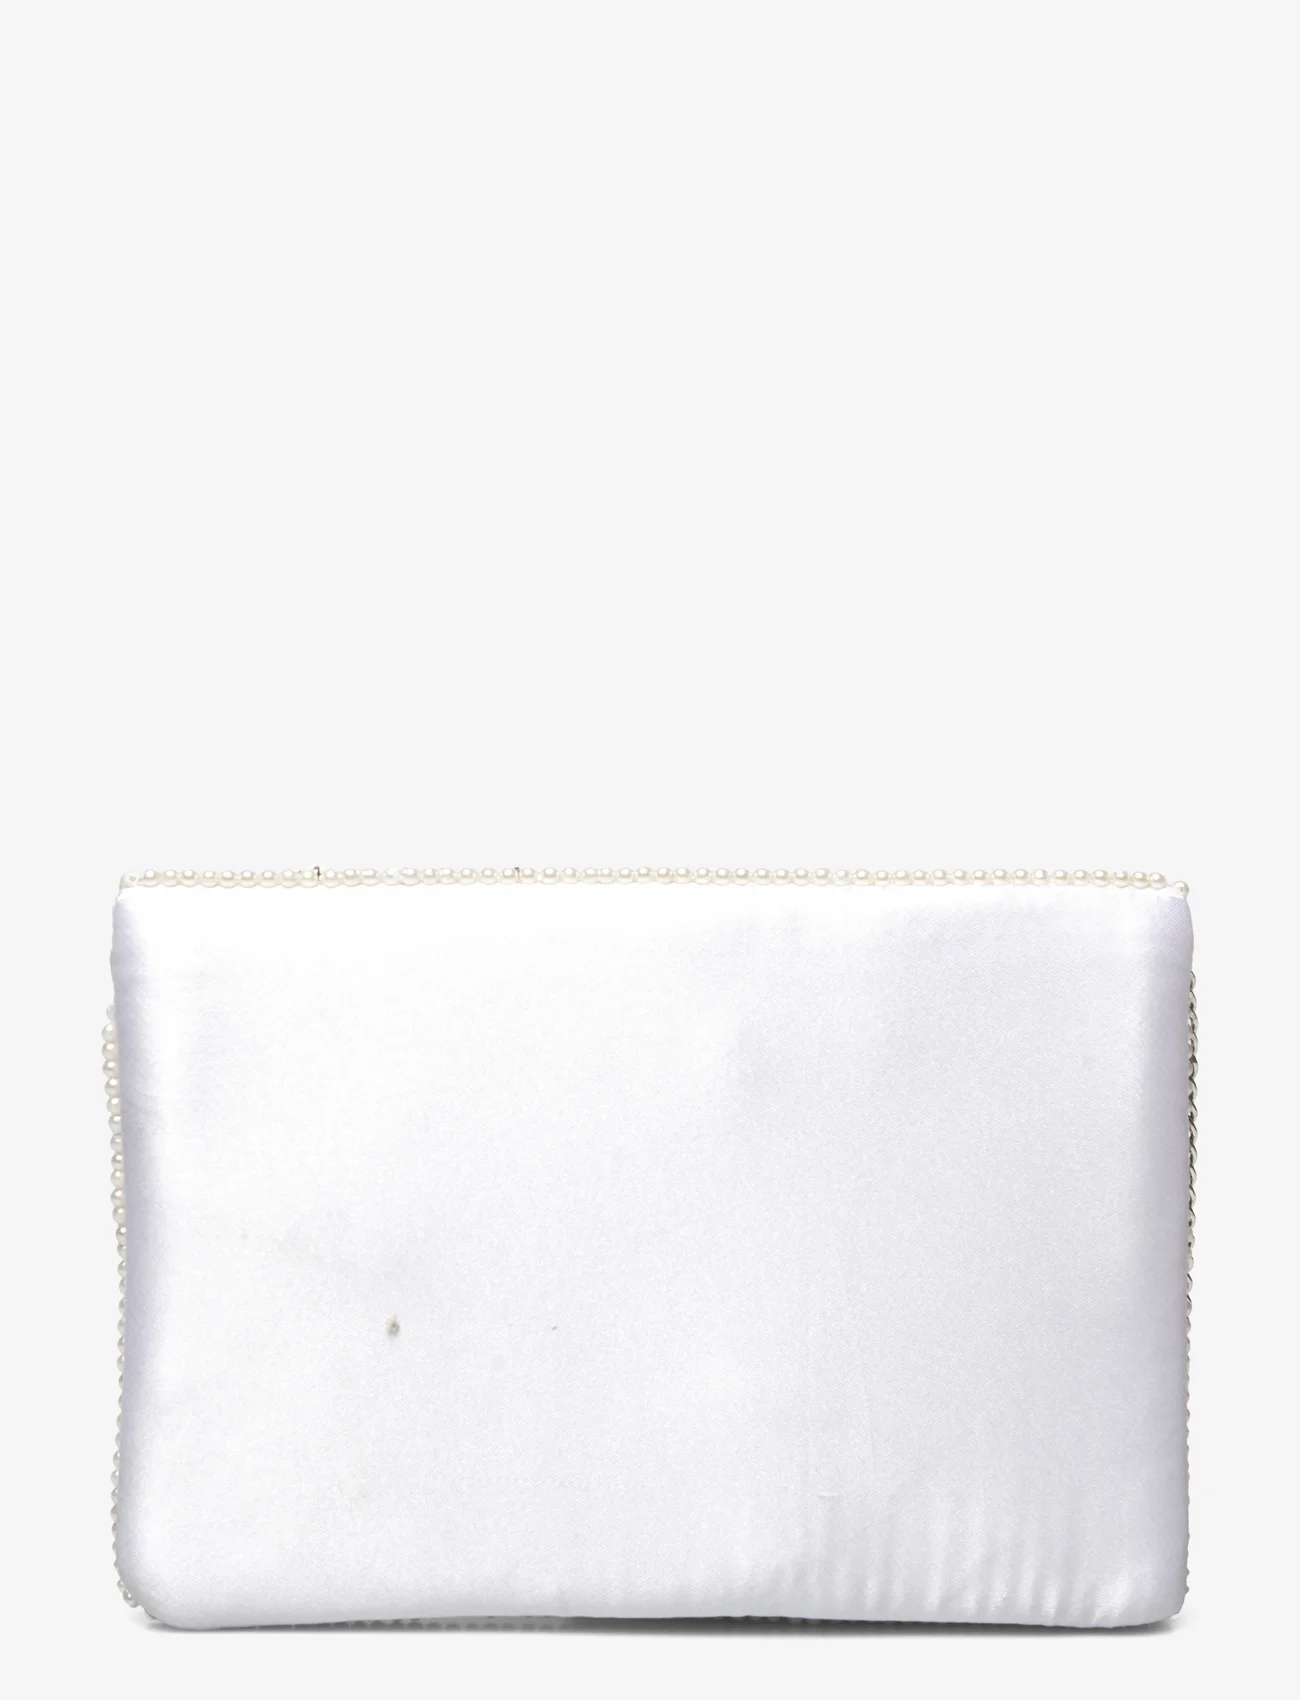 Pipol's Bazaar - Amorella Clutch White - party wear at outlet prices - white - 1